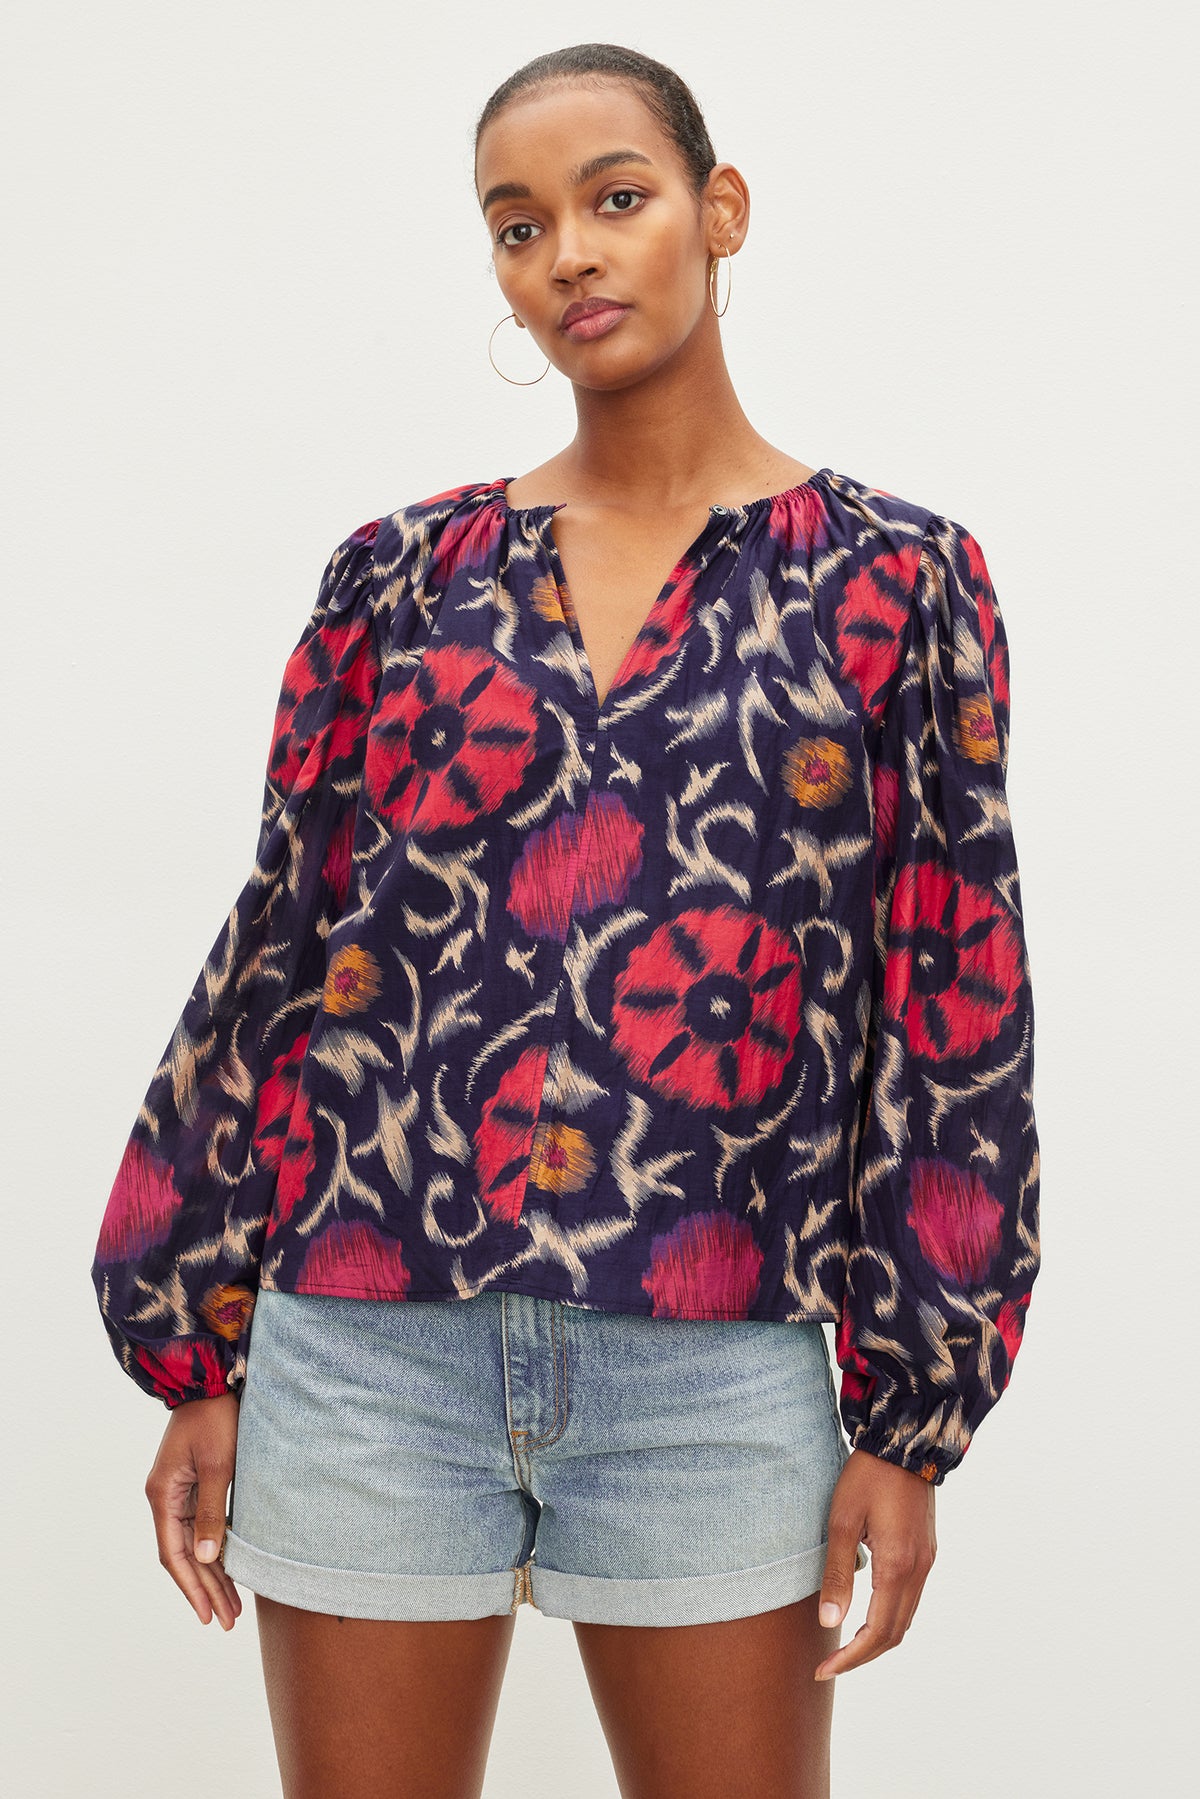   Woman posing in a Fraser printed silk cotton voile top by Velvet by Graham & Spencer with long sleeves and an elastic neckline, paired with denim shorts. 